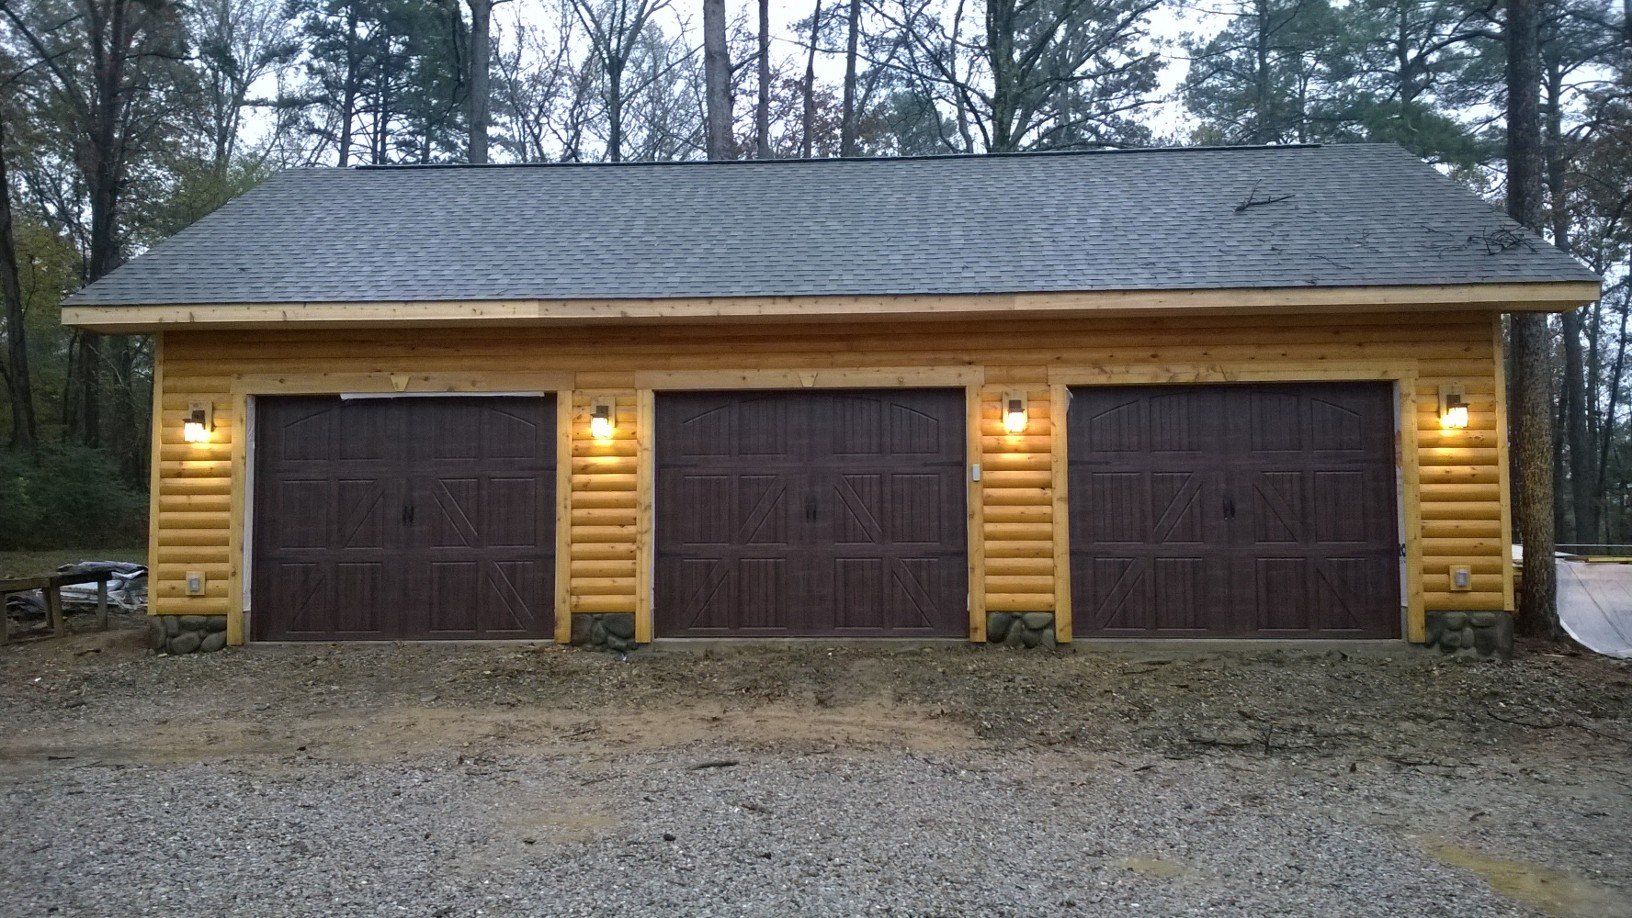 Latest Overhead Garage Door Company Near Me for Small Space